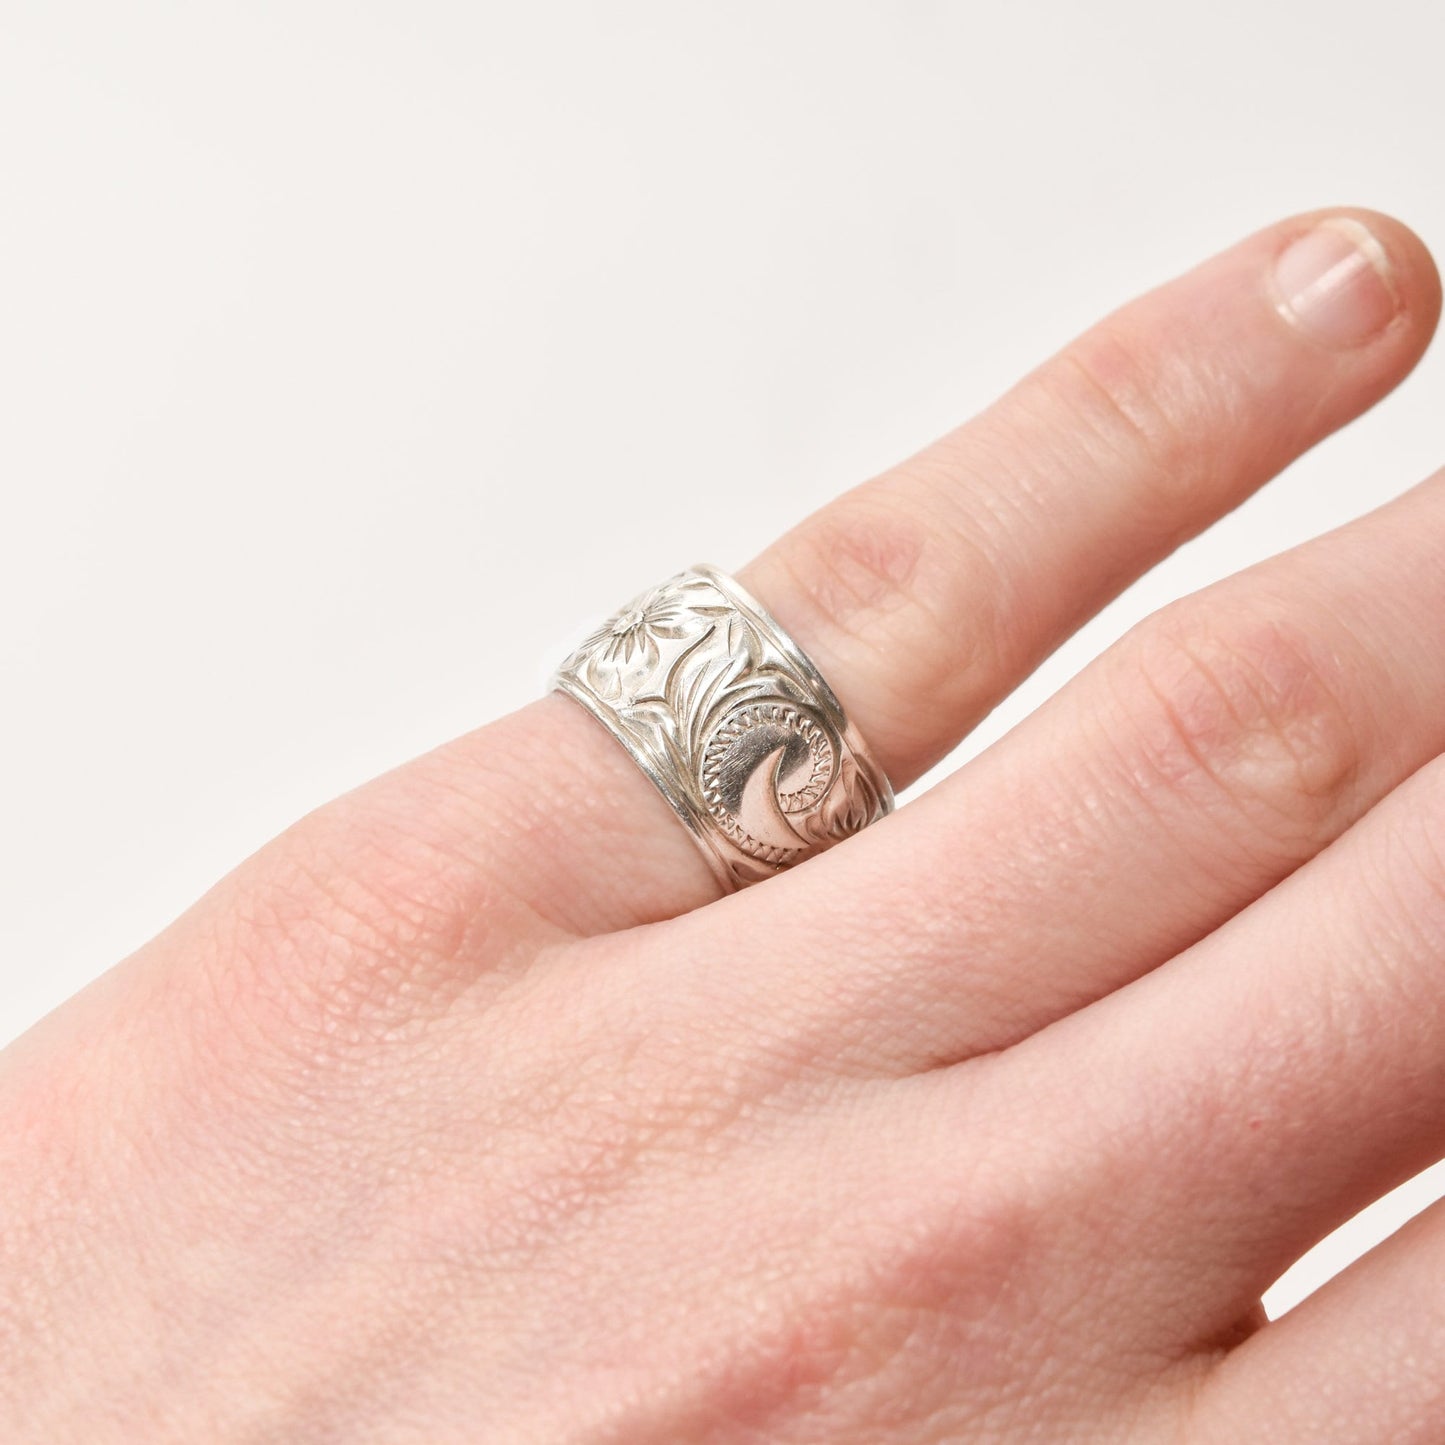 Floral engraved sterling silver band ring 11.5mm wide in Art Nouveau style, size 6 US, displayed on a finger against a white background